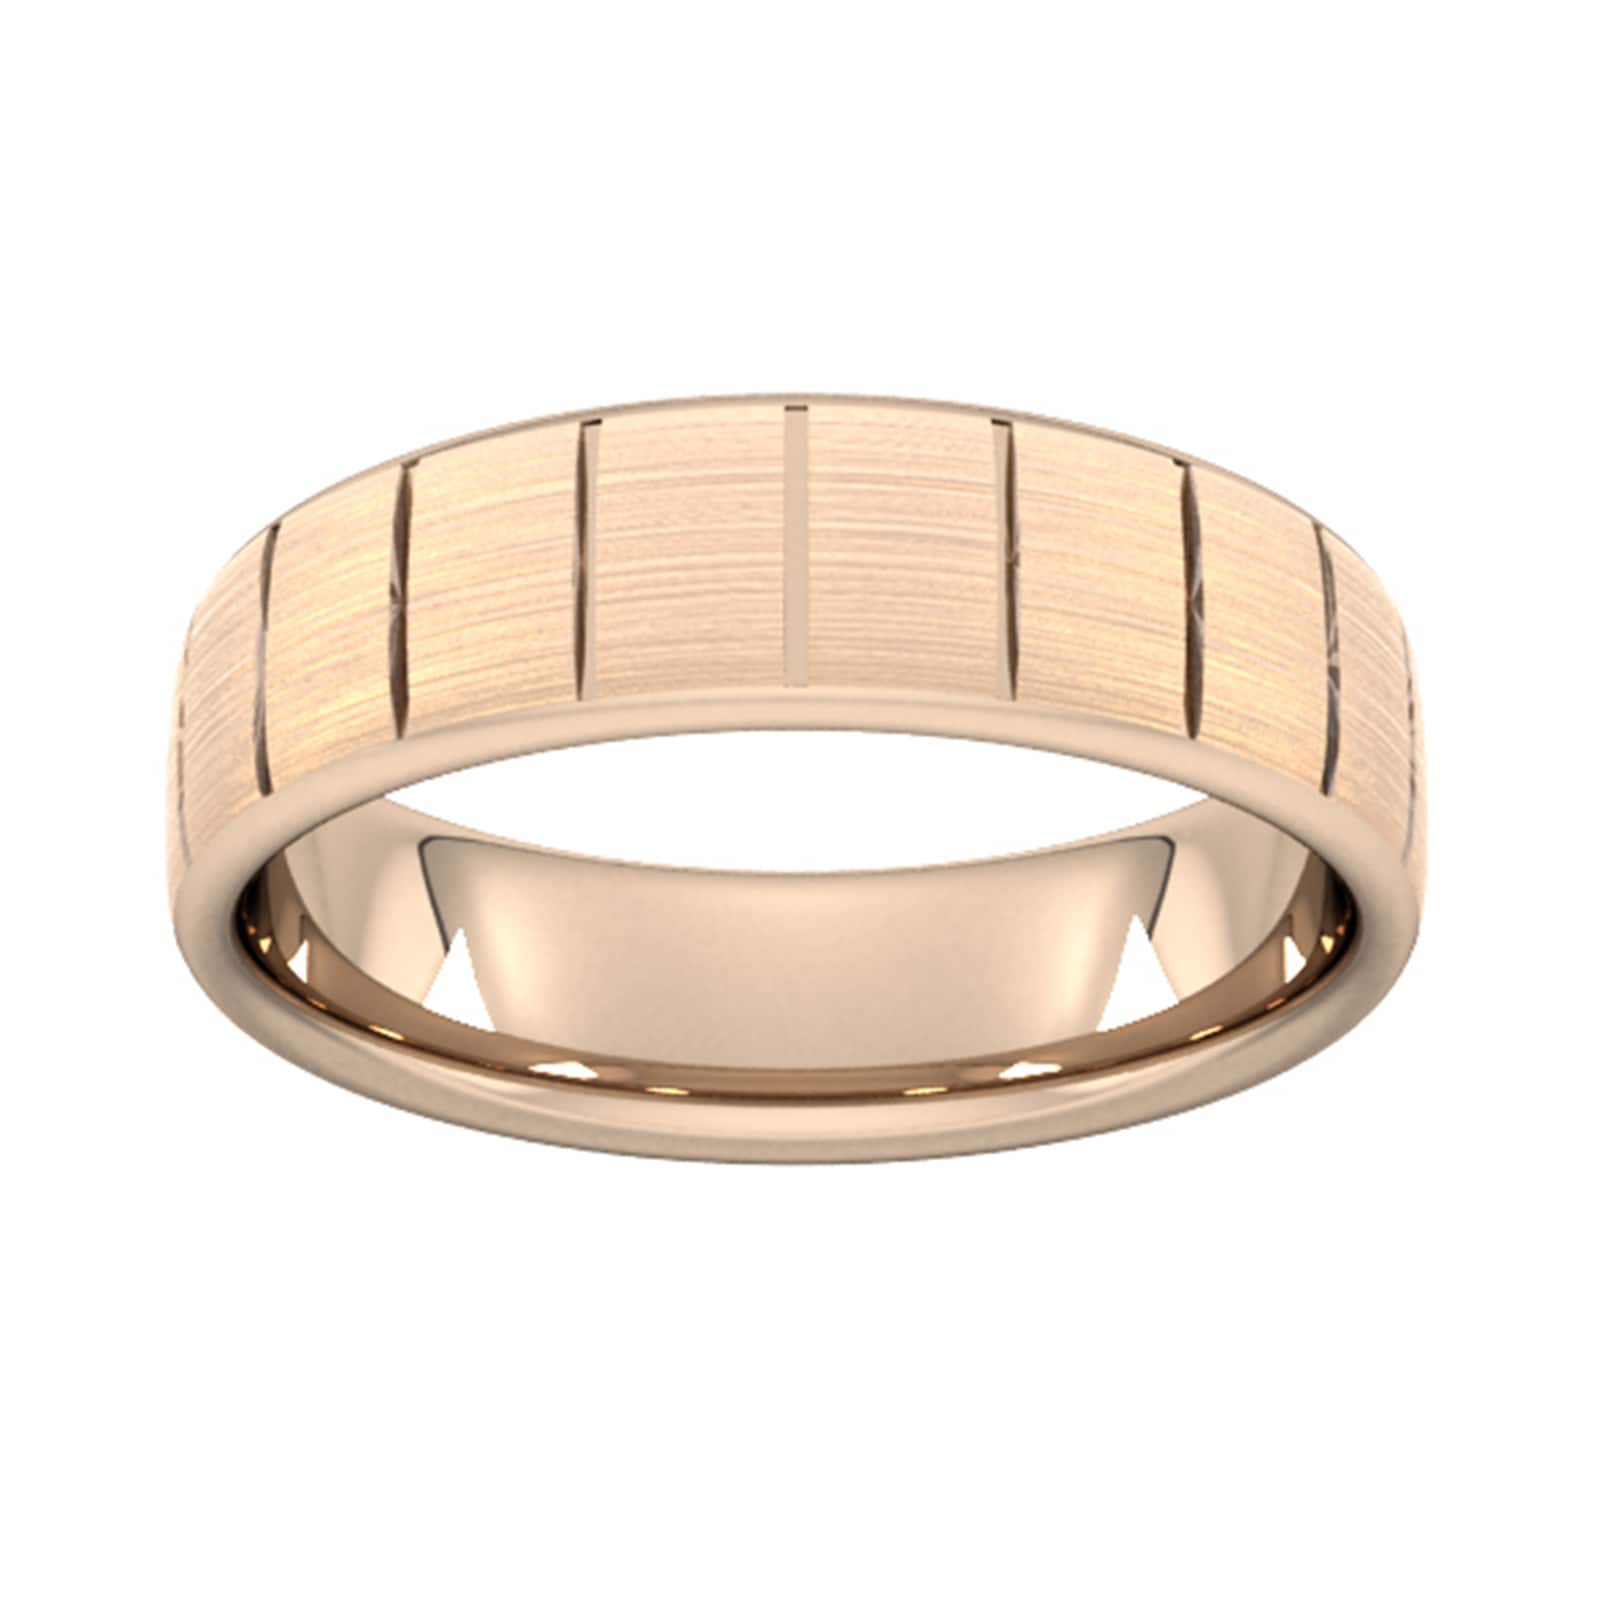 6mm Slight Court Heavy Vertical Lines Wedding Ring In 18 Carat Rose Gold - Ring Size R